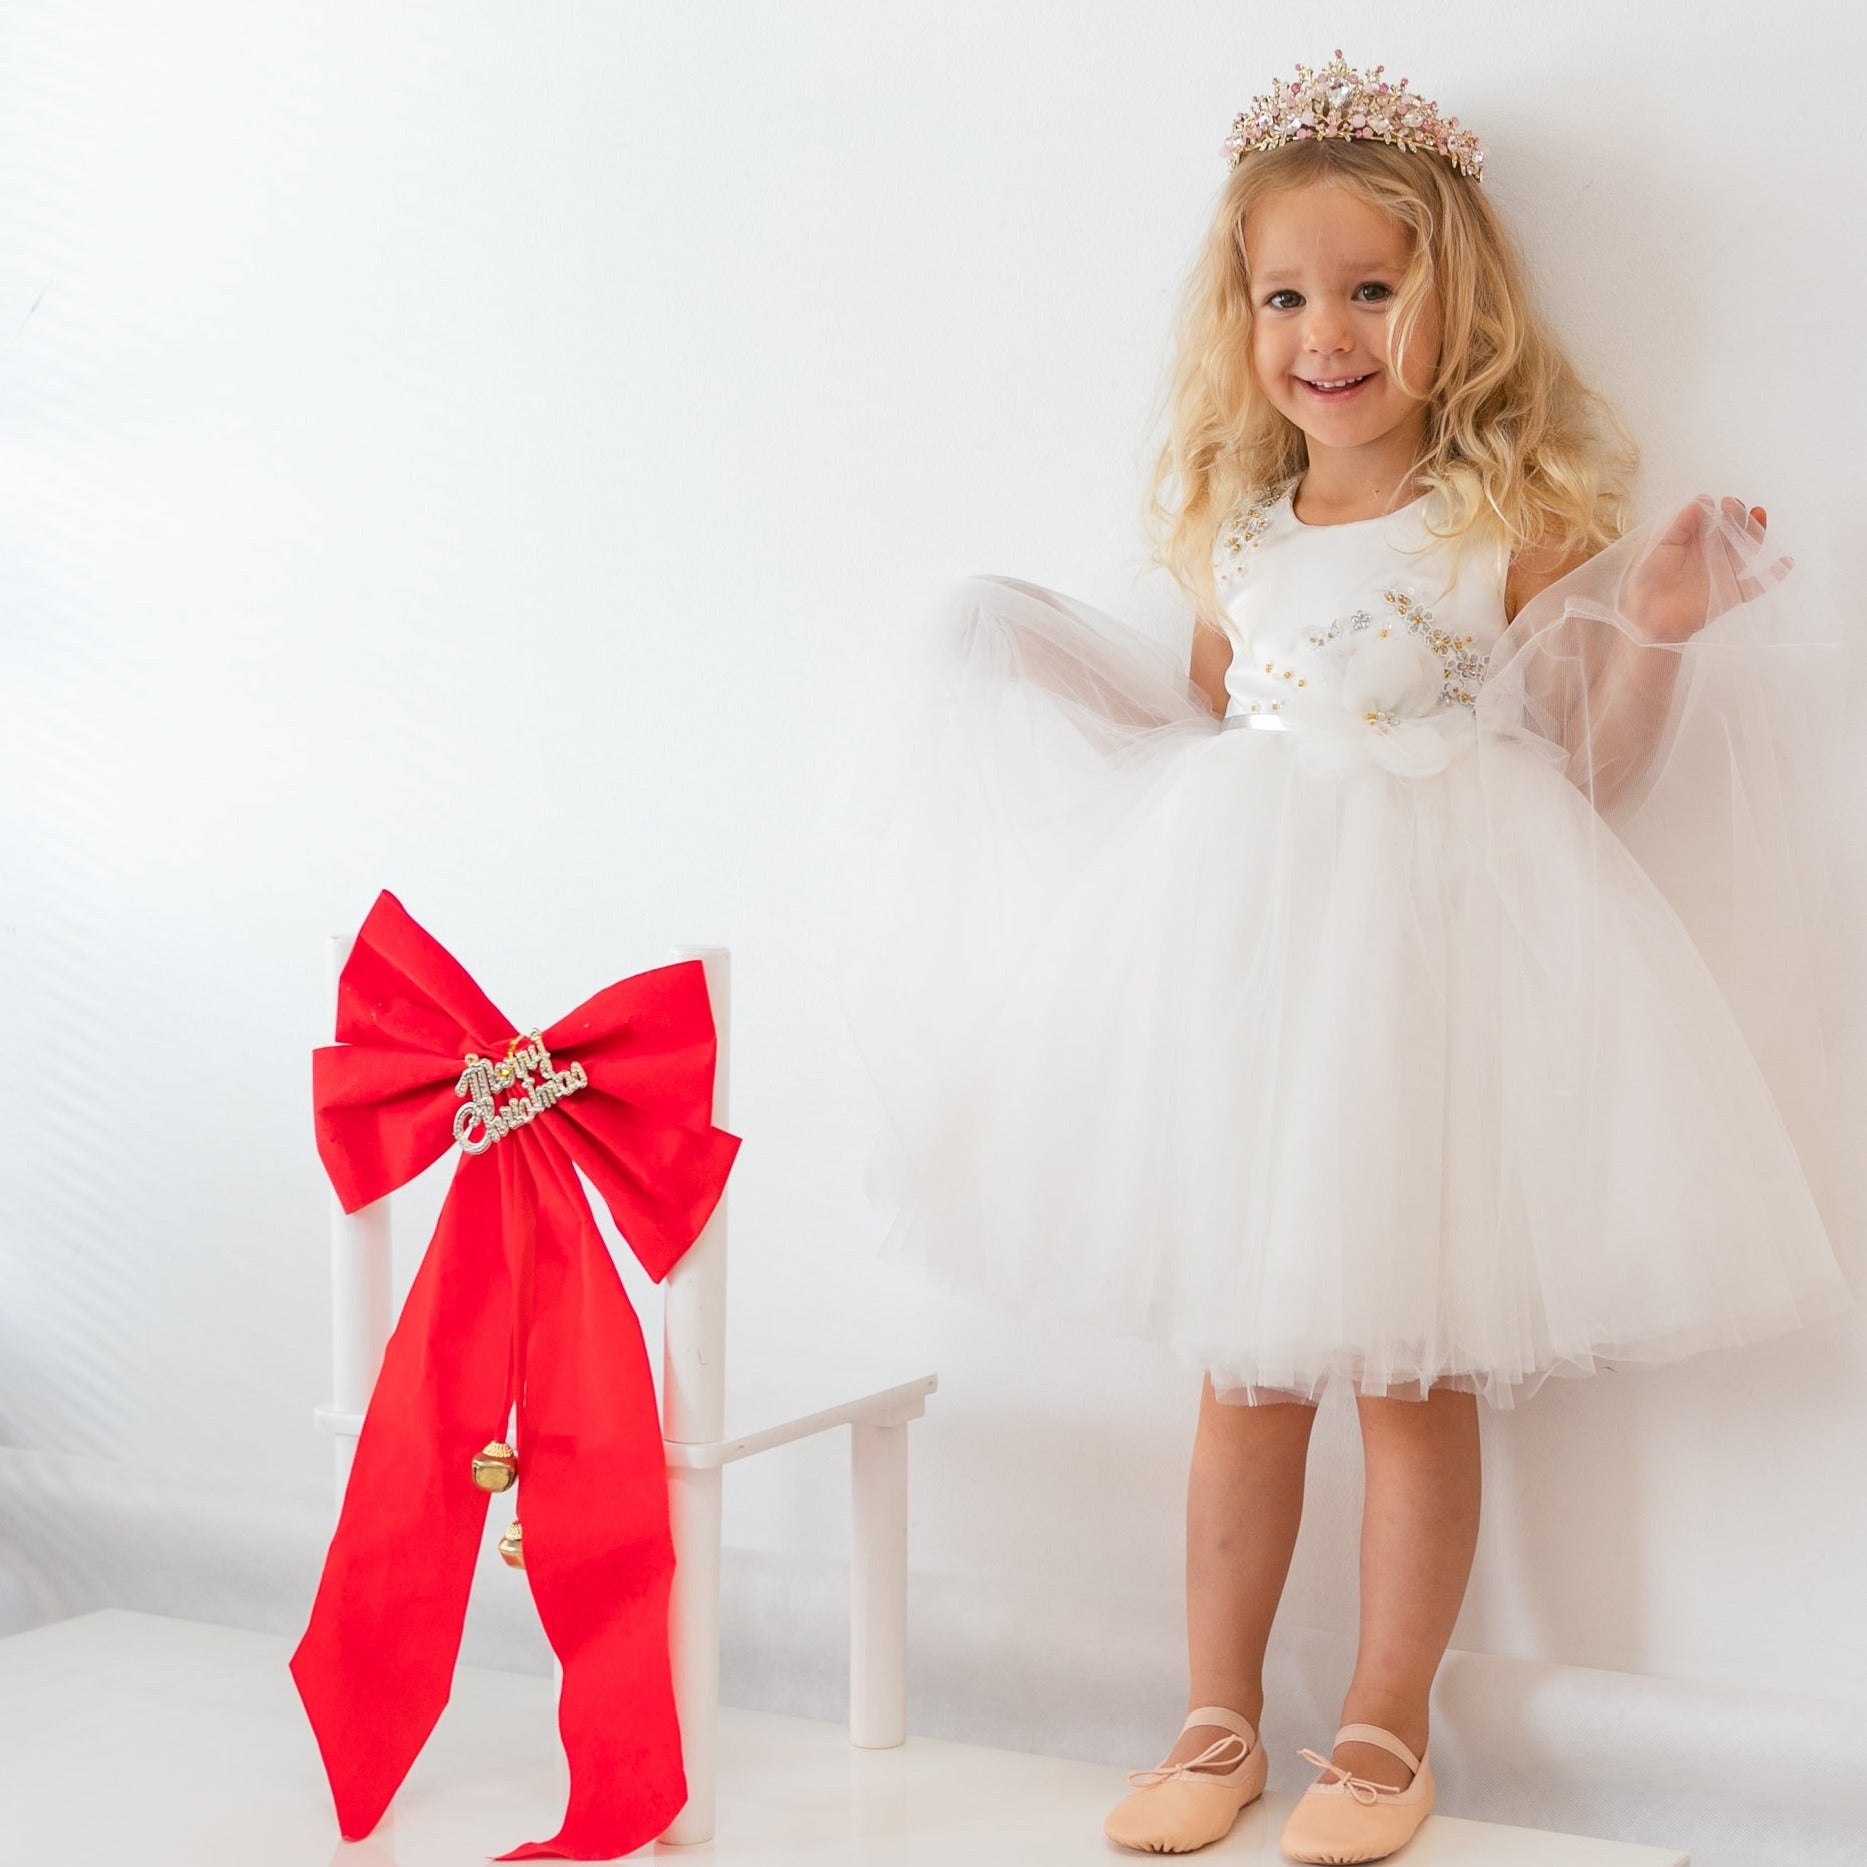 Sorrento Boutique | Special wear for little people